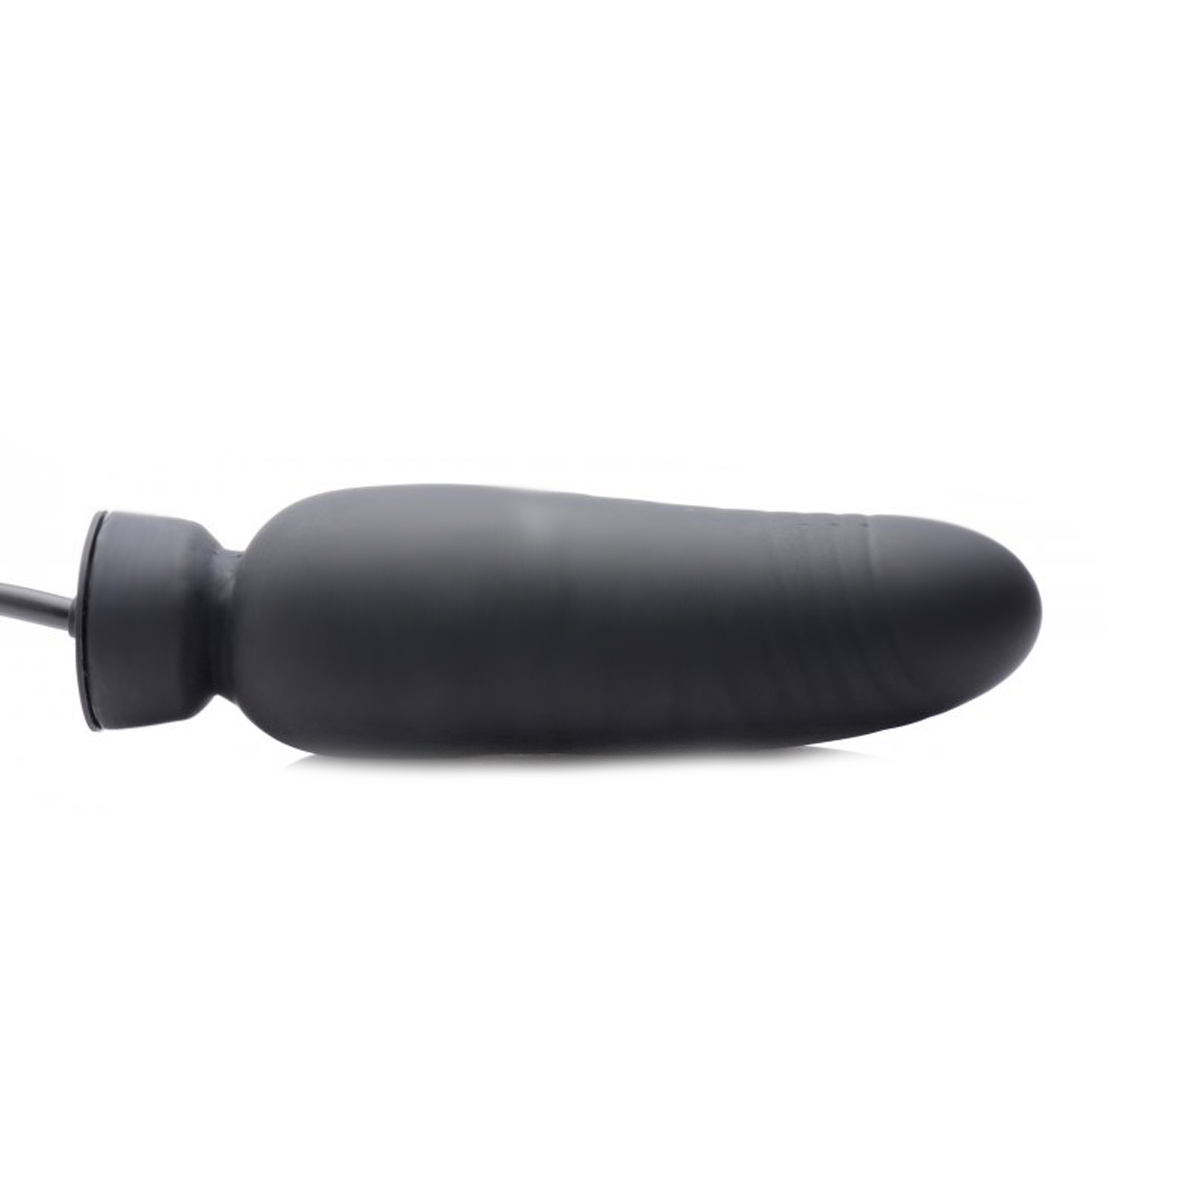 Dick-Spand-Inflatable-Silicone-Dildo-118-XR-AG554-2